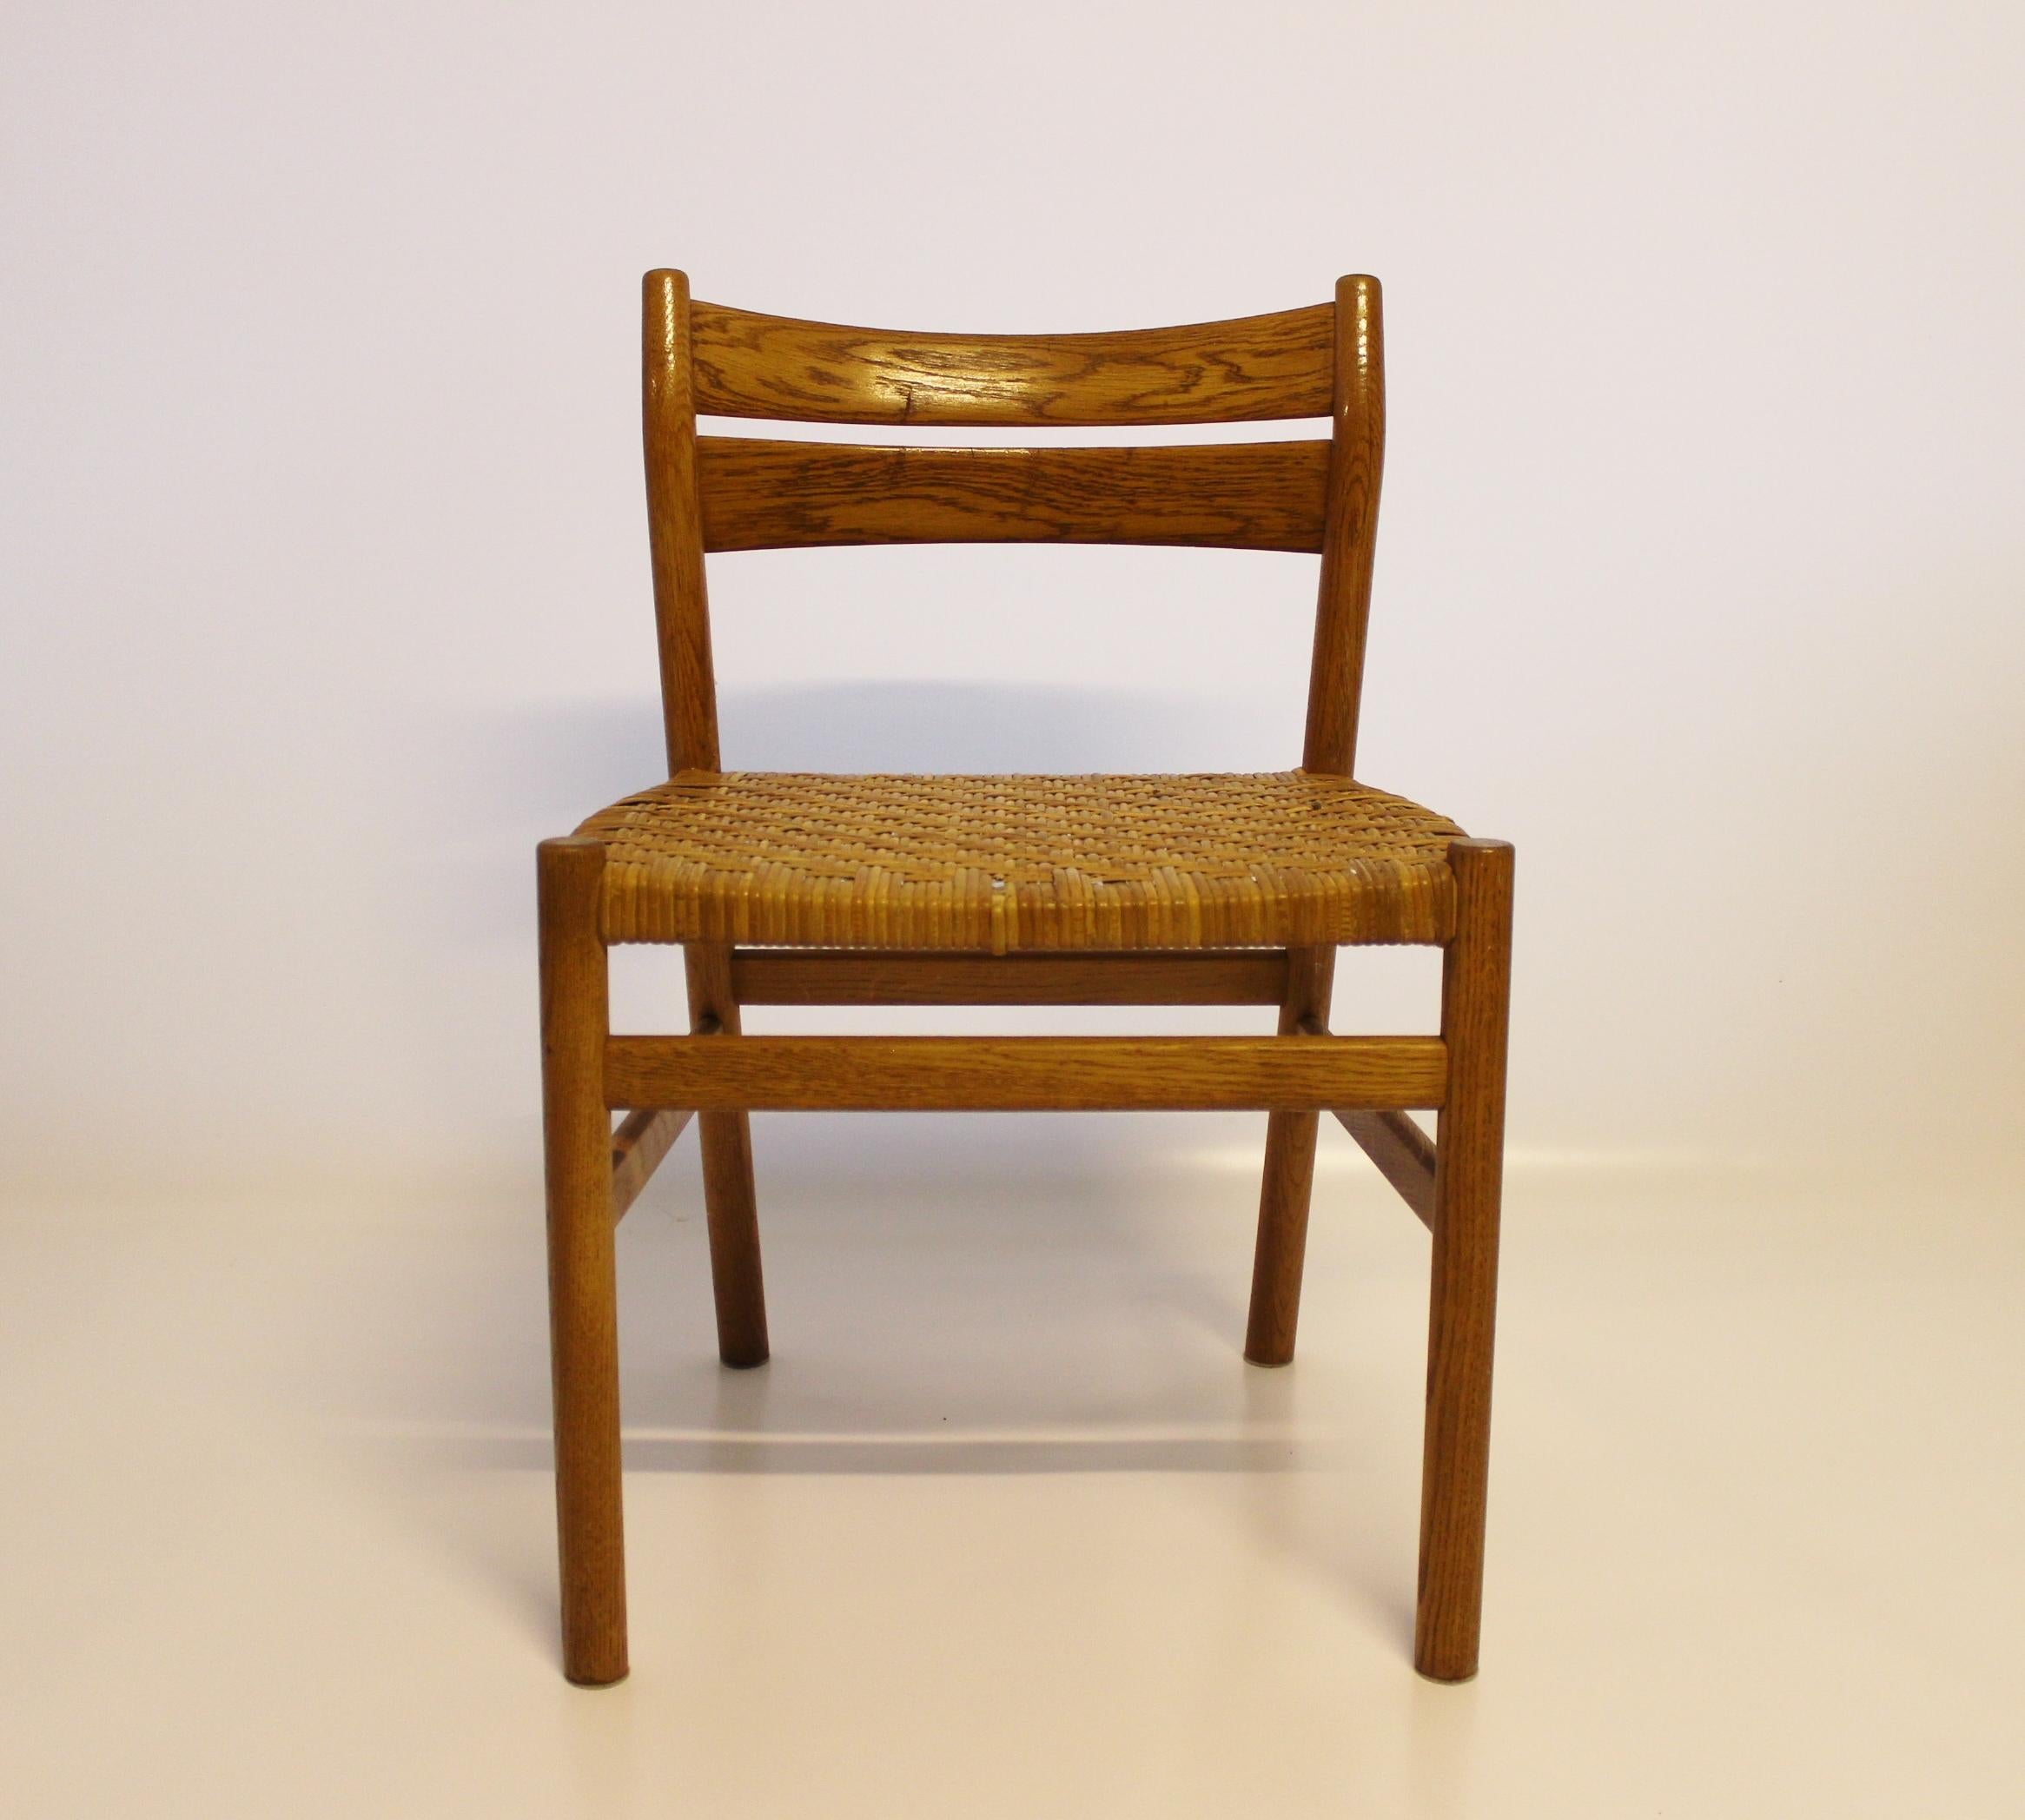 Exquisite Set of Four Dining Room Chairs: A timeless embodiment of Danish design from the illustrious 1960s, crafted in oak and featuring seats woven in papercord.

These dining chairs stand as iconic representatives of the renowned Danish design